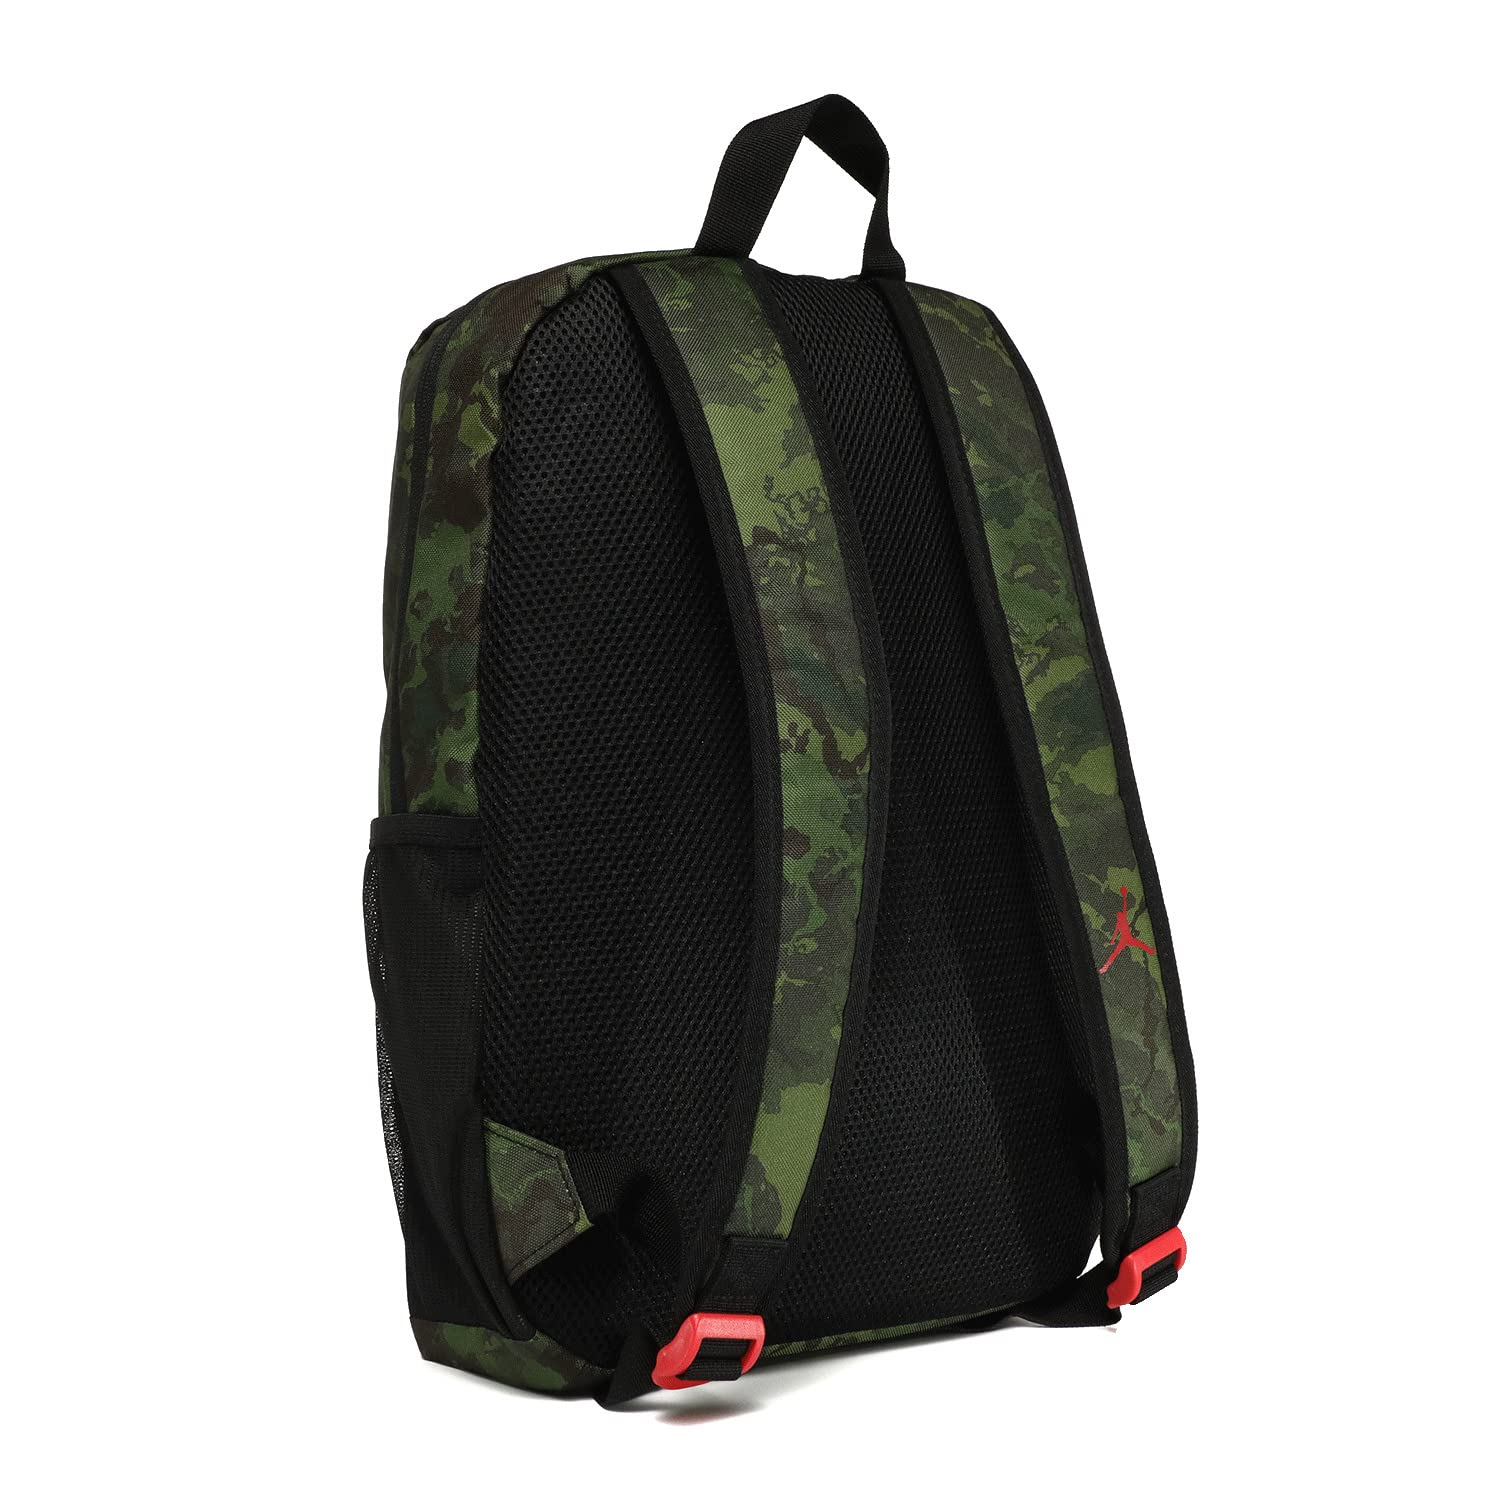 Image 2 of Zion Essentials Backpack